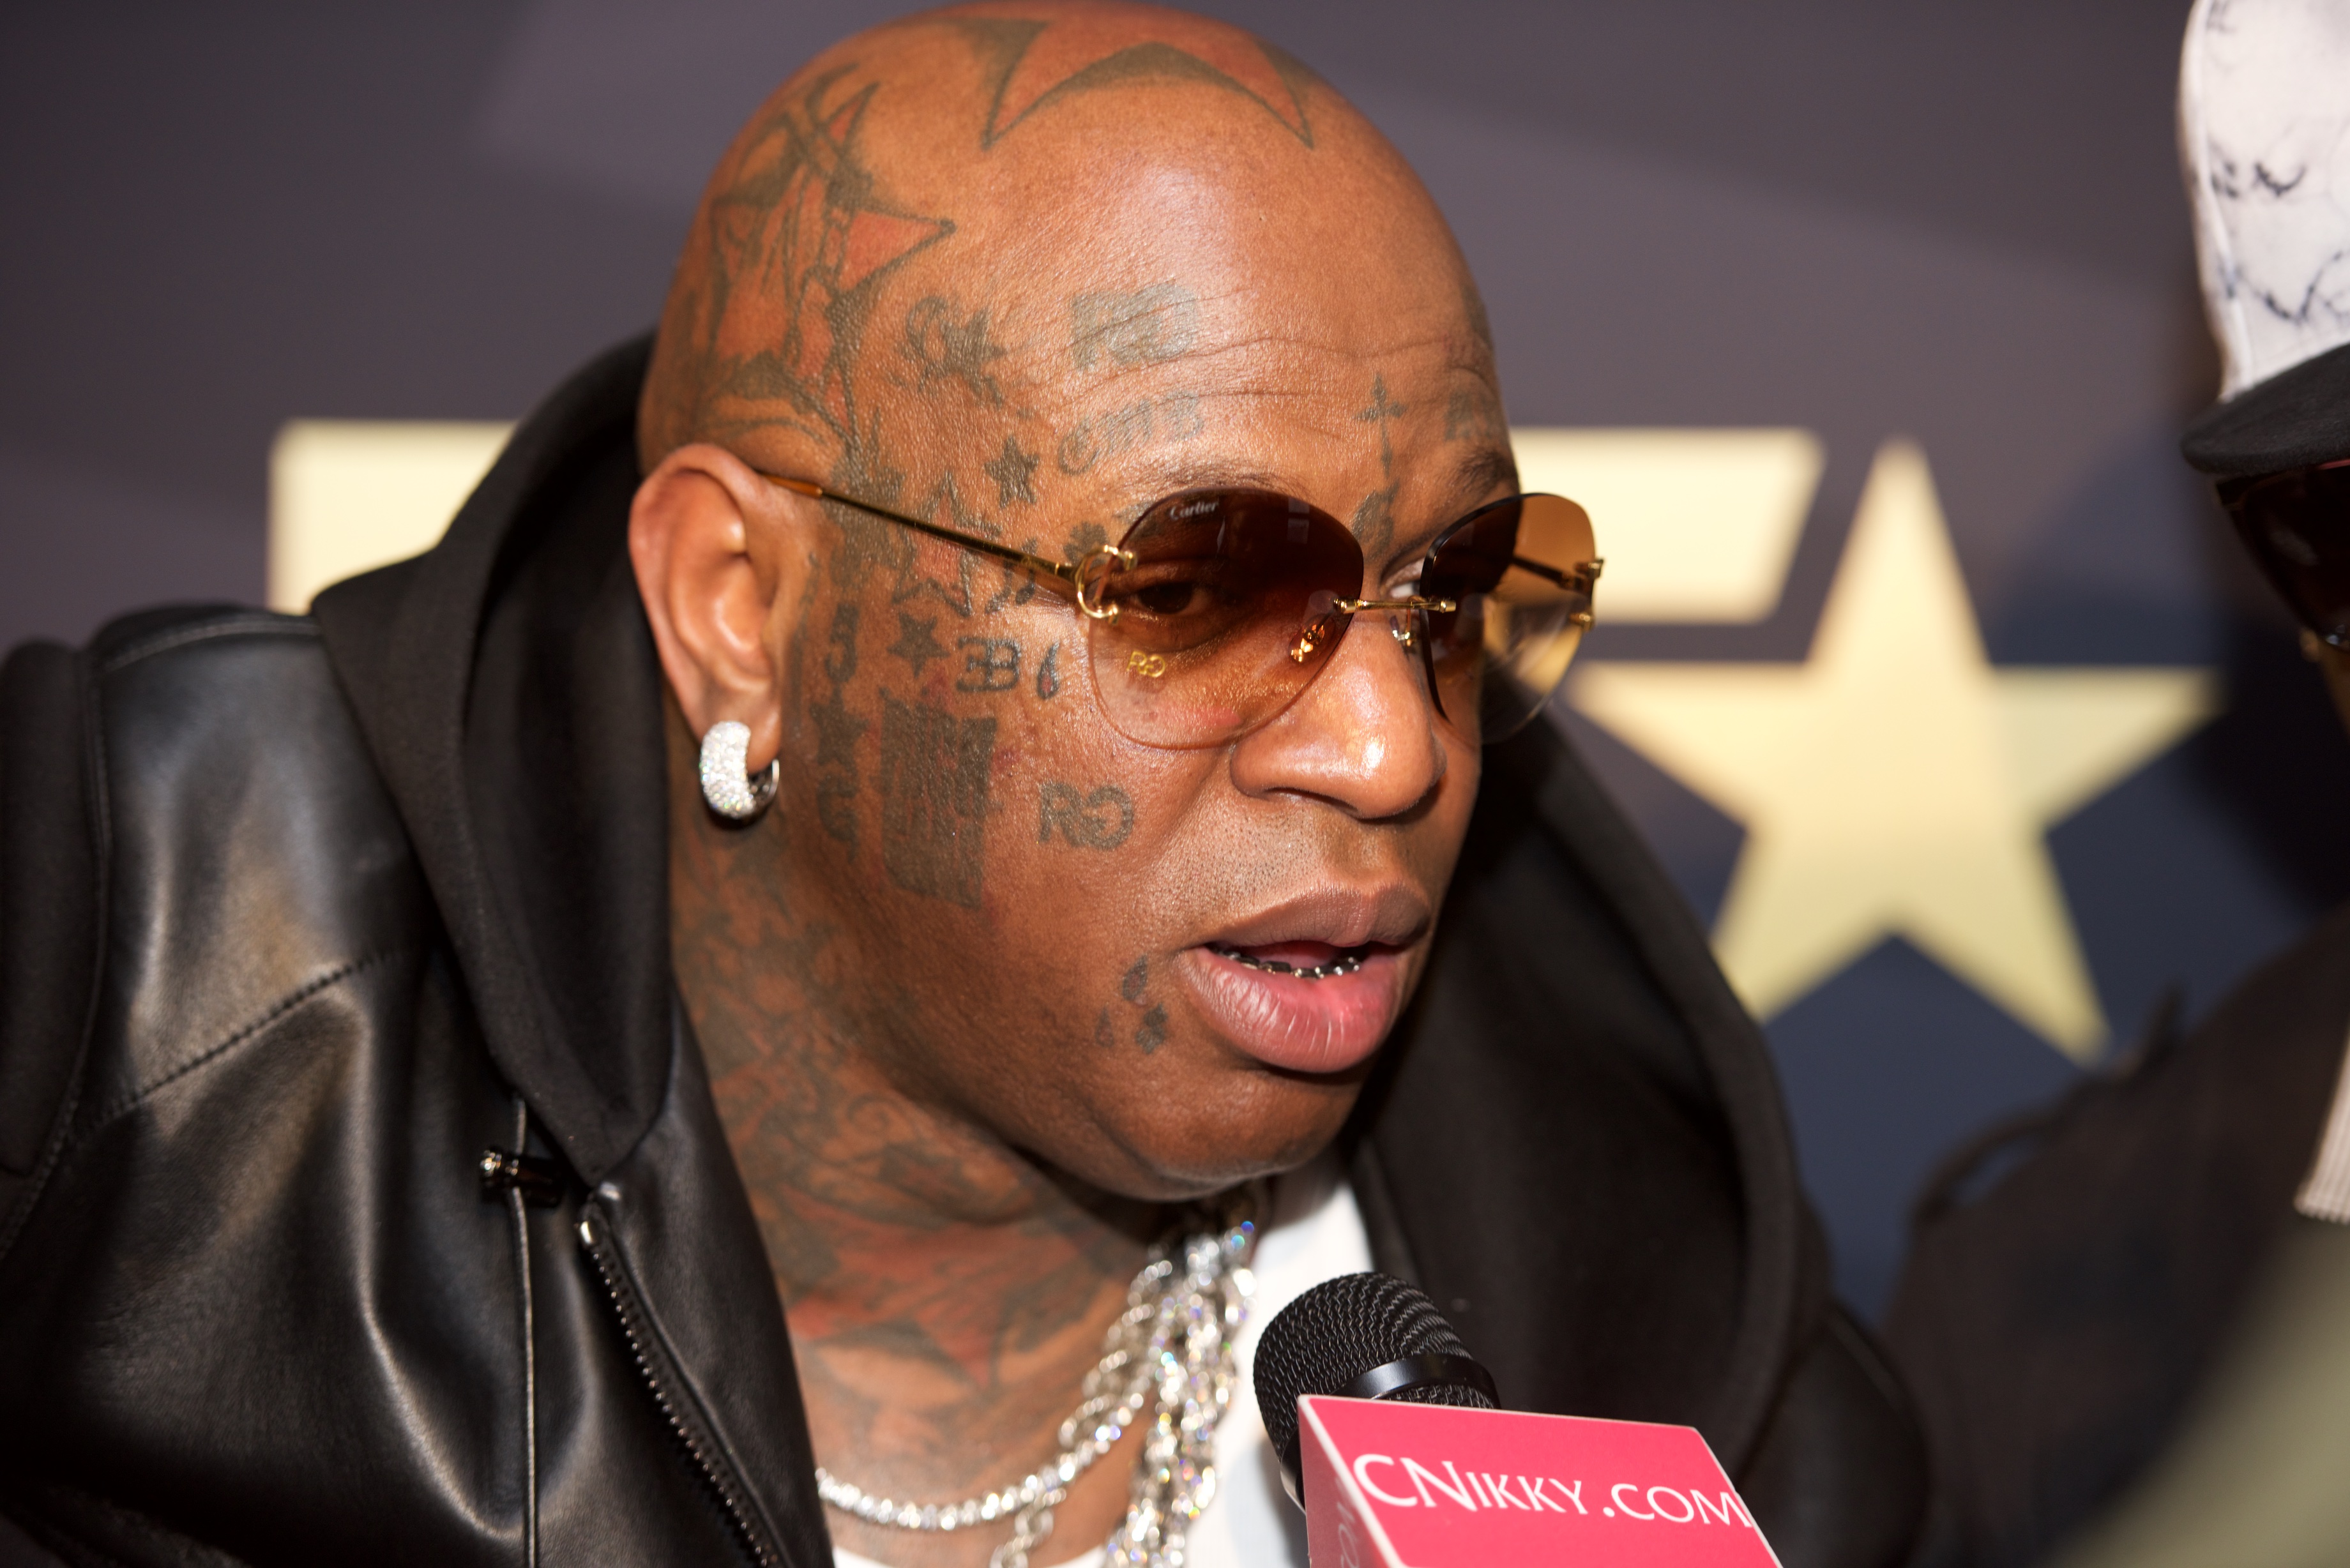 Birdman attends BET "Music Moguls" Premiere Event on June 27, 2016 in West Hollywood, California.  (Photo by Earl Gibson III/Getty)